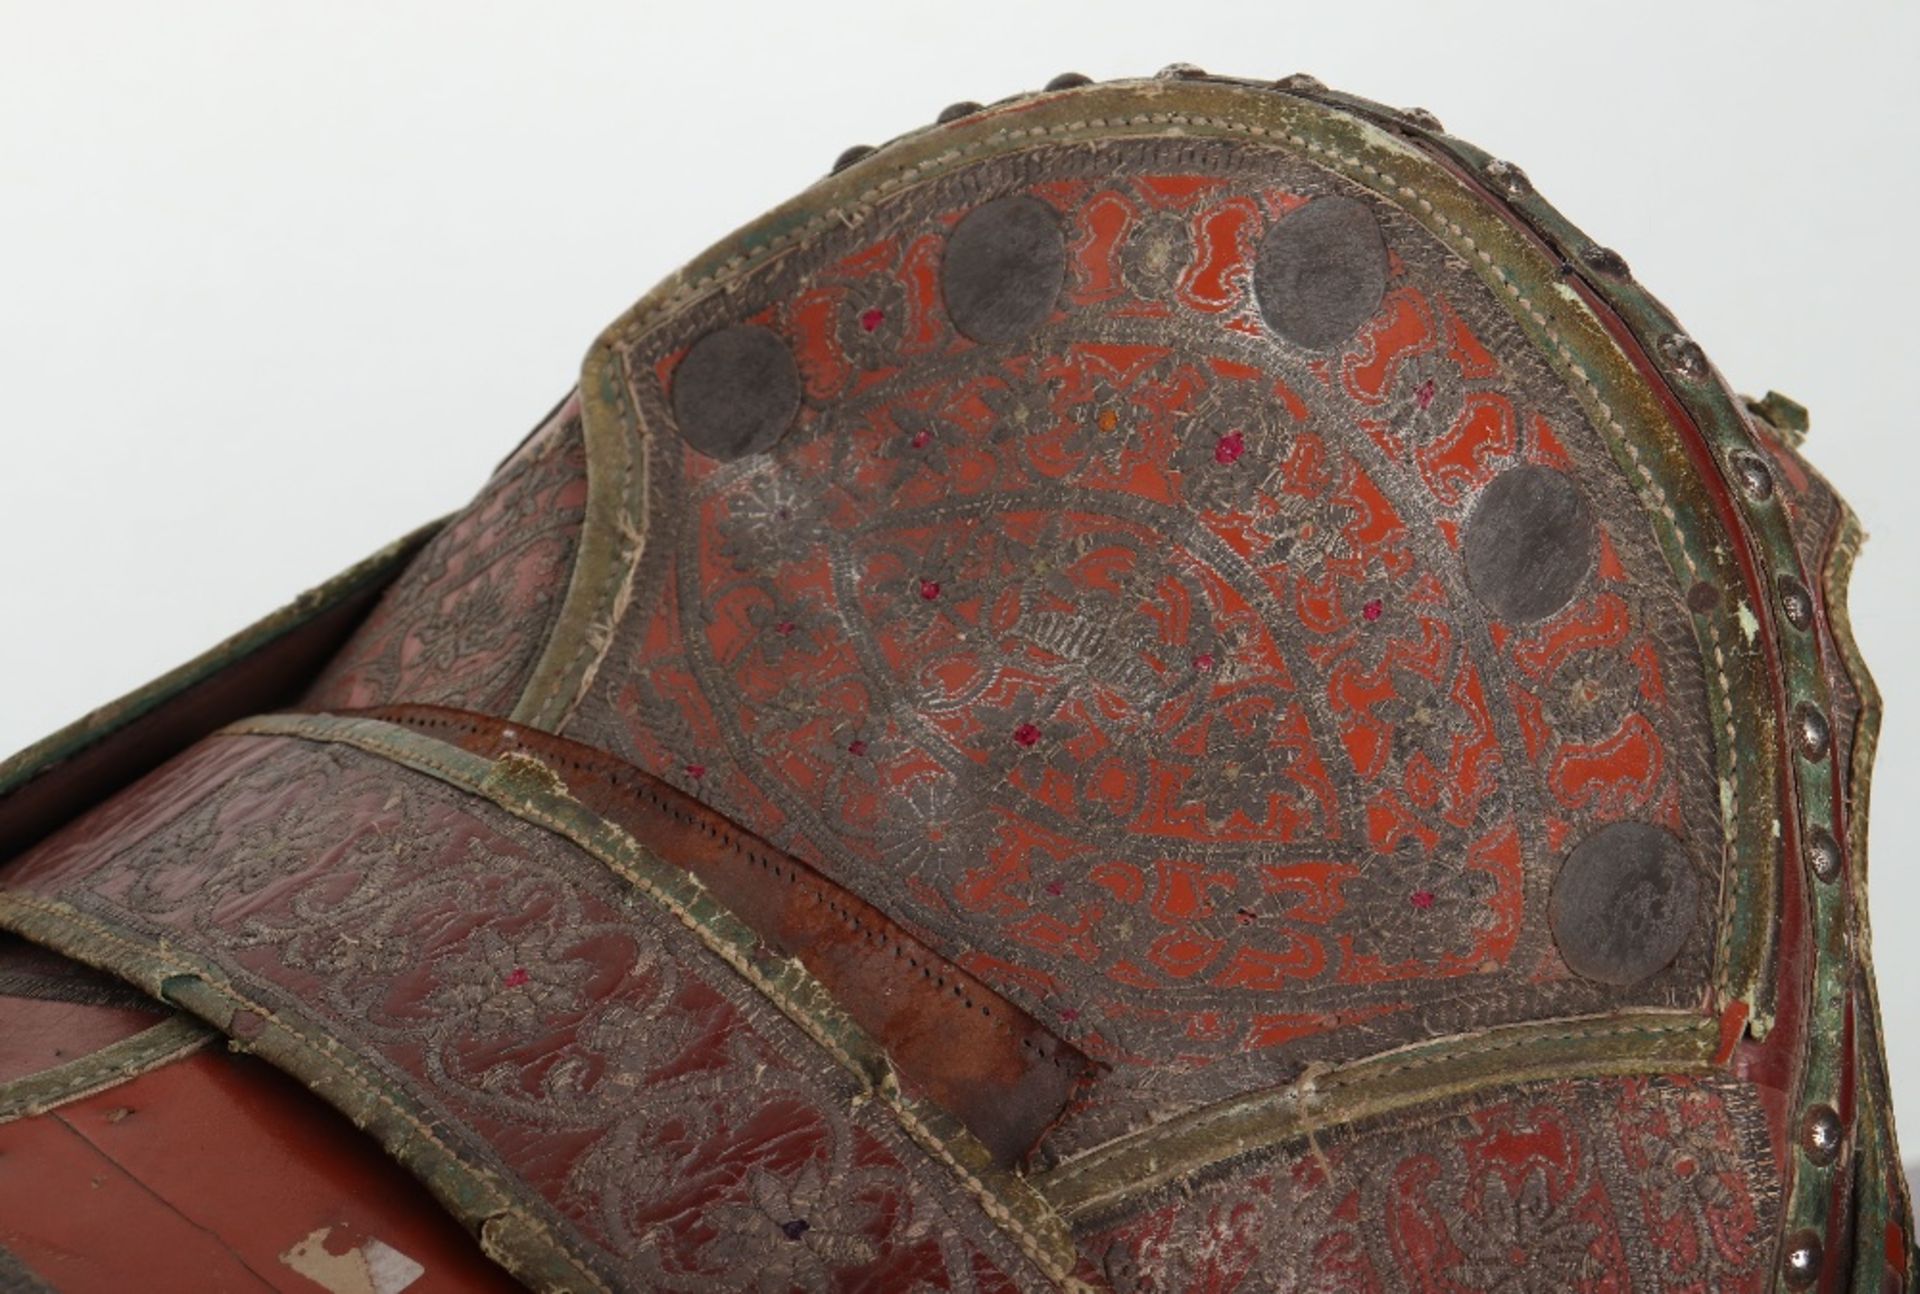 Fine and Scarce North Indian Saddle, Probably Late 19th or Early 20th Century - Image 5 of 12